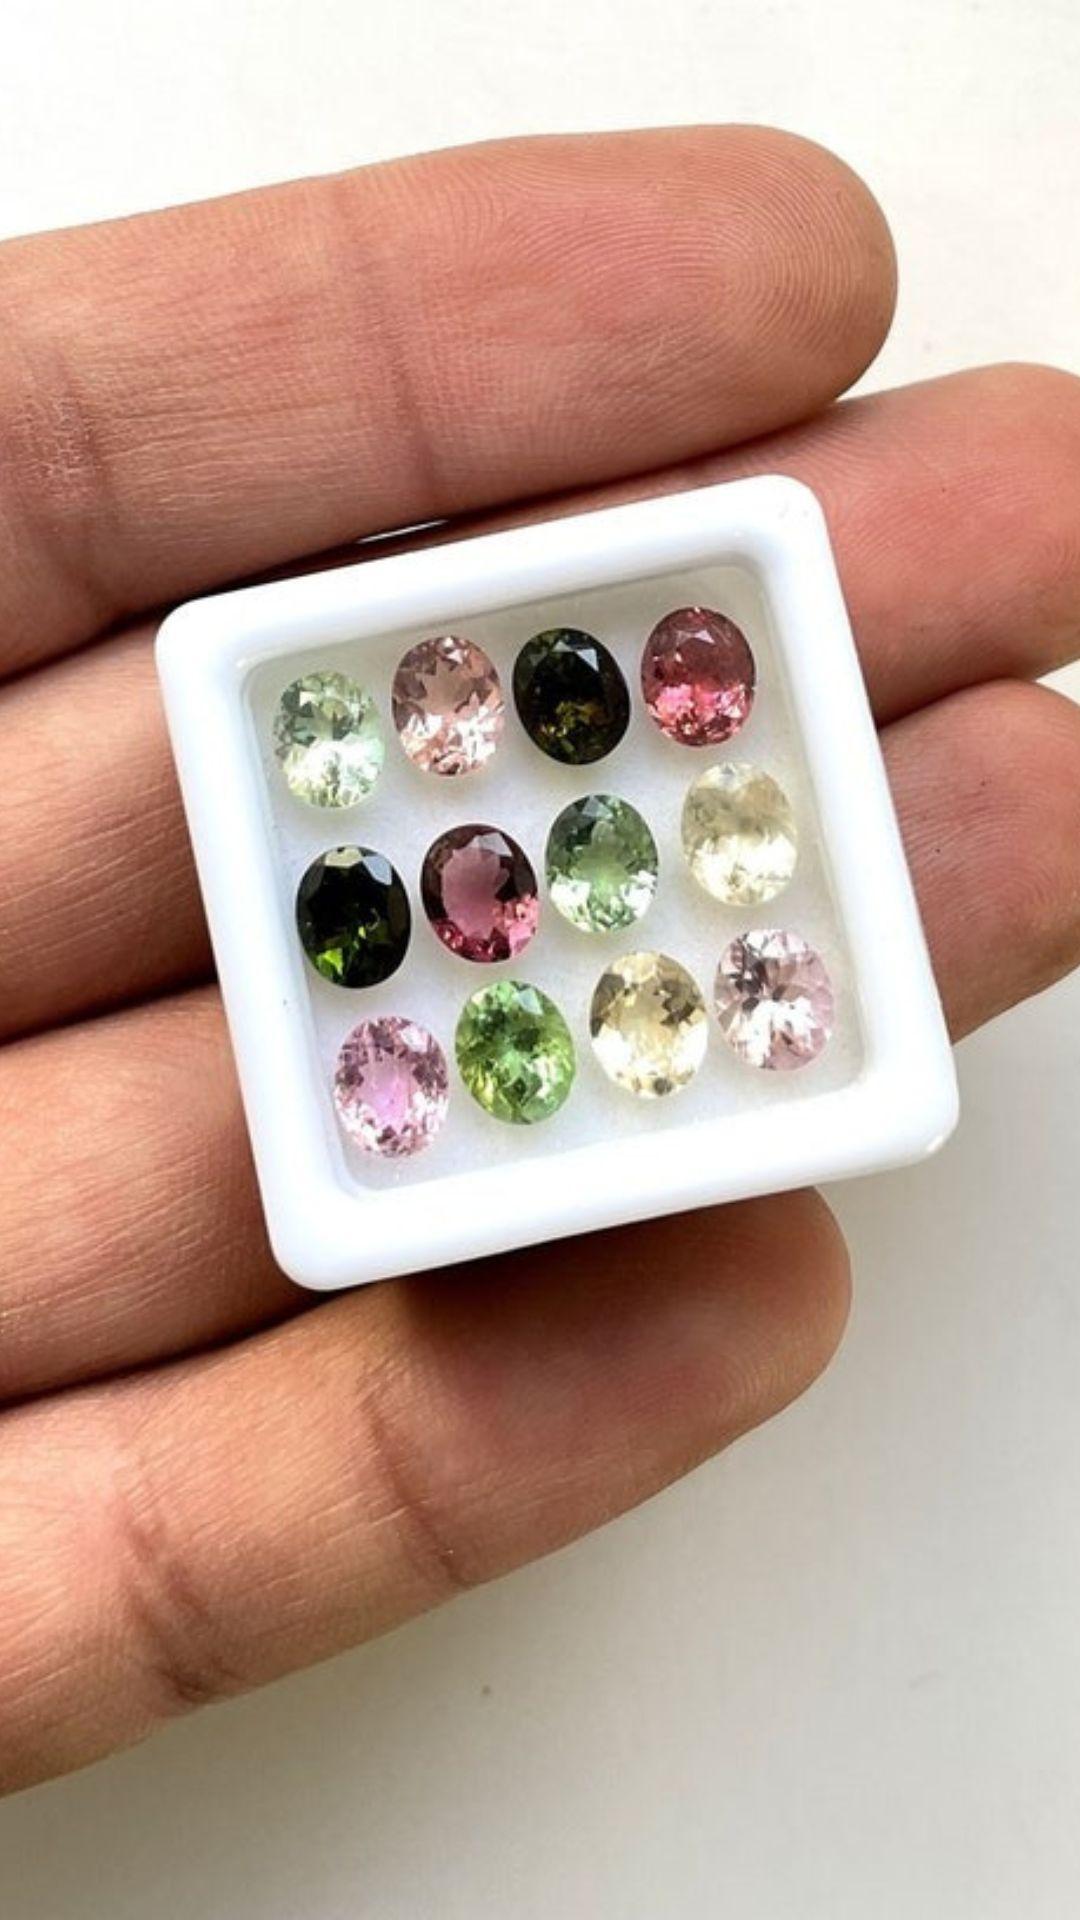 7.50 carats multi tourmaline , top quality tourmaline earrings cut , natural tourmaline gemstone 12 pieces for jewelry

Gemstone - Tourmaline
Weight- 7.50 Carats
Shape - Oval
Size - 6x5 To 6x5 MM
Pieces - 12
Drill- Not Drilled

Prismatic Gems (: